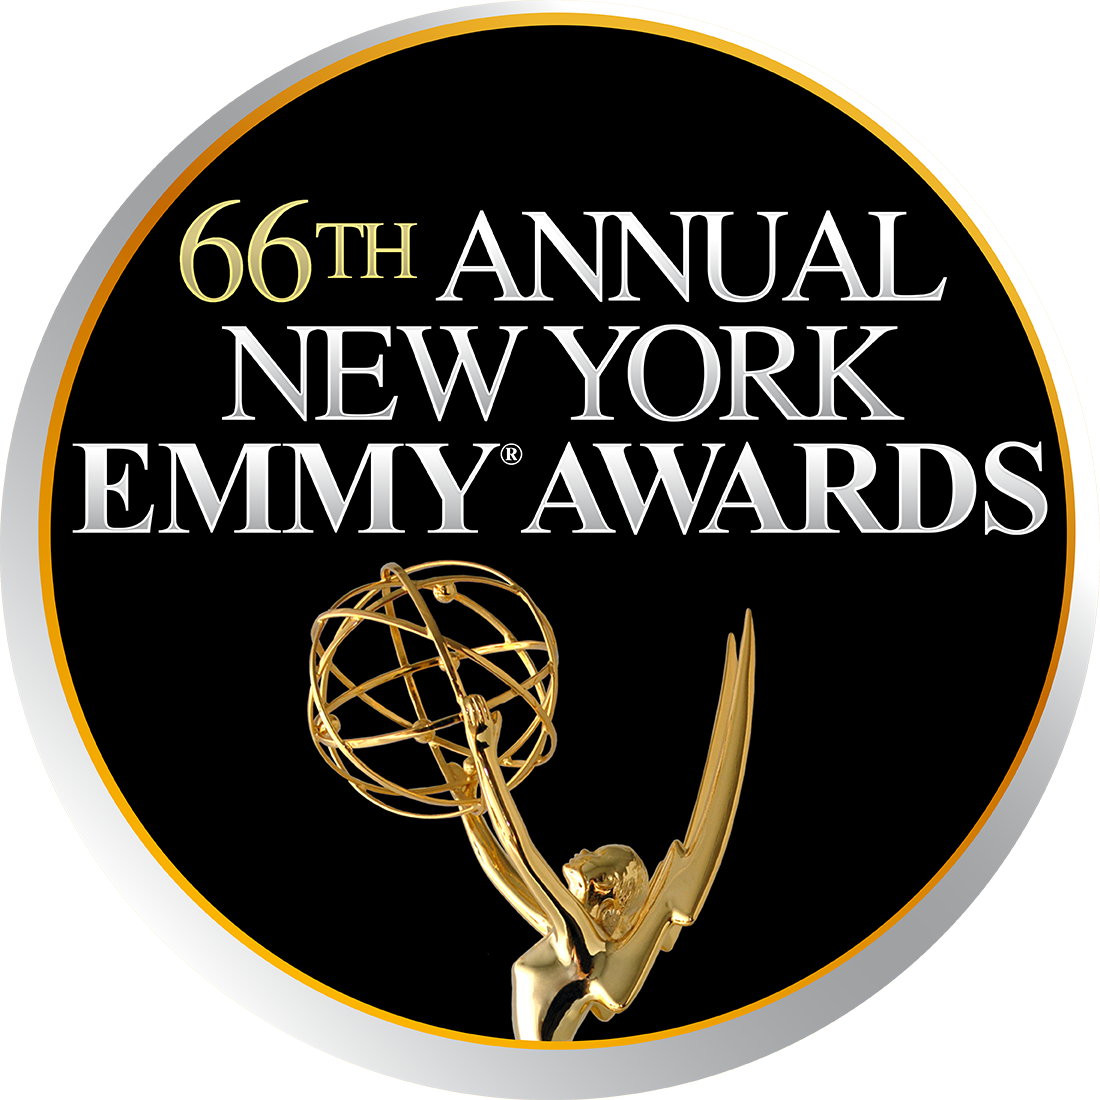 CONGRATULATIONS TO ALL OF THE RECIPIENTS IN THE 66TH ANNUAL NY EMMY® AWARDS CEREMONIES